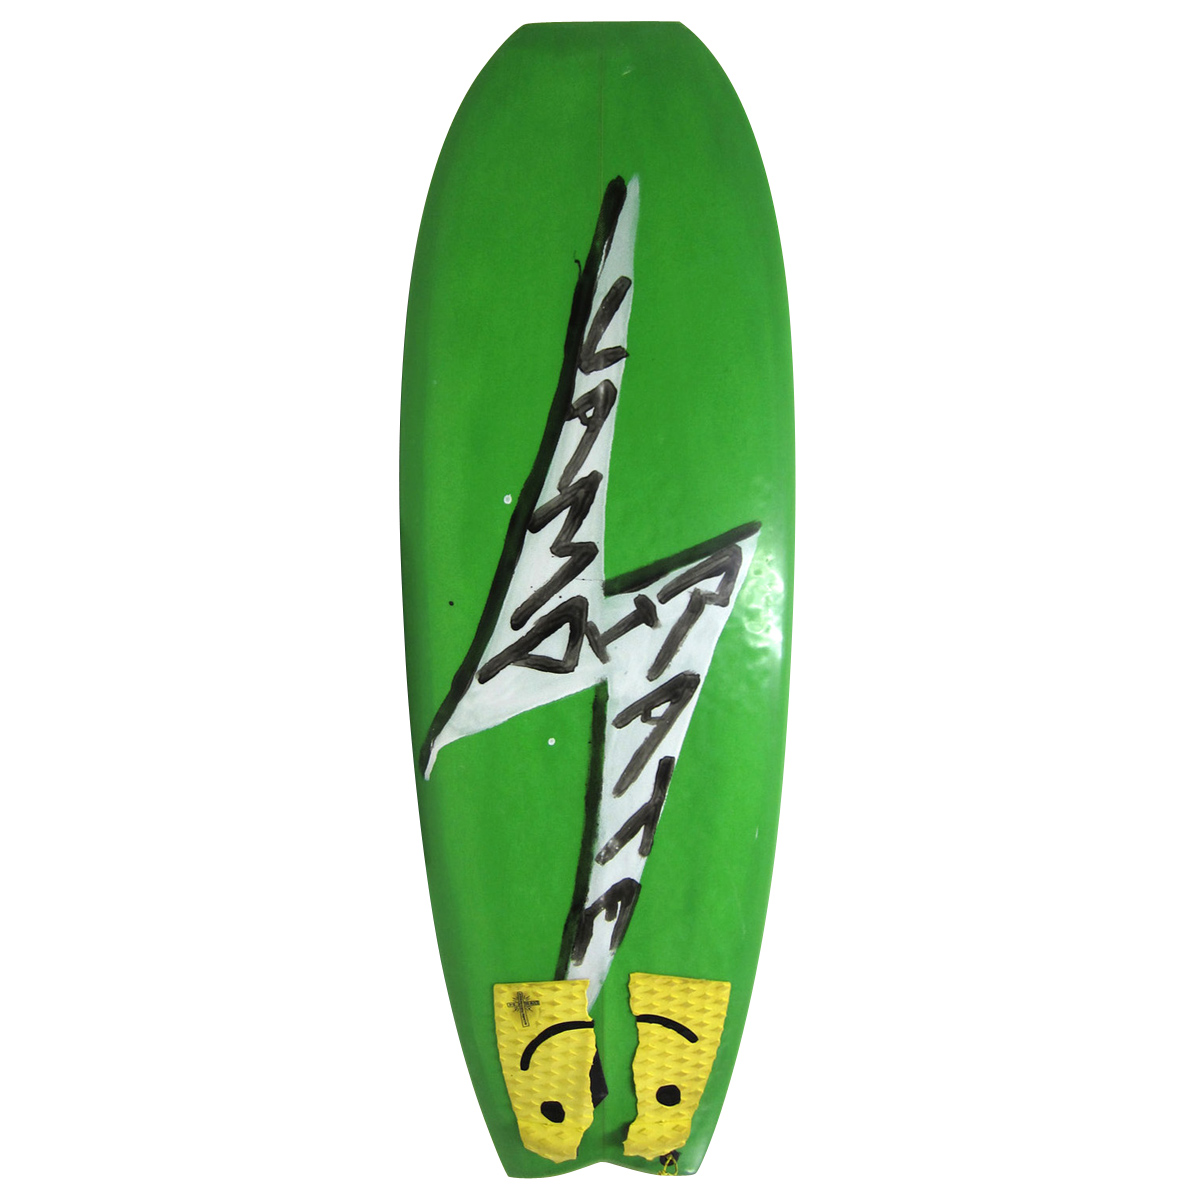  / Vampirate Surfboards / GRAVE DIGGER 5`2 EVIL TWIN